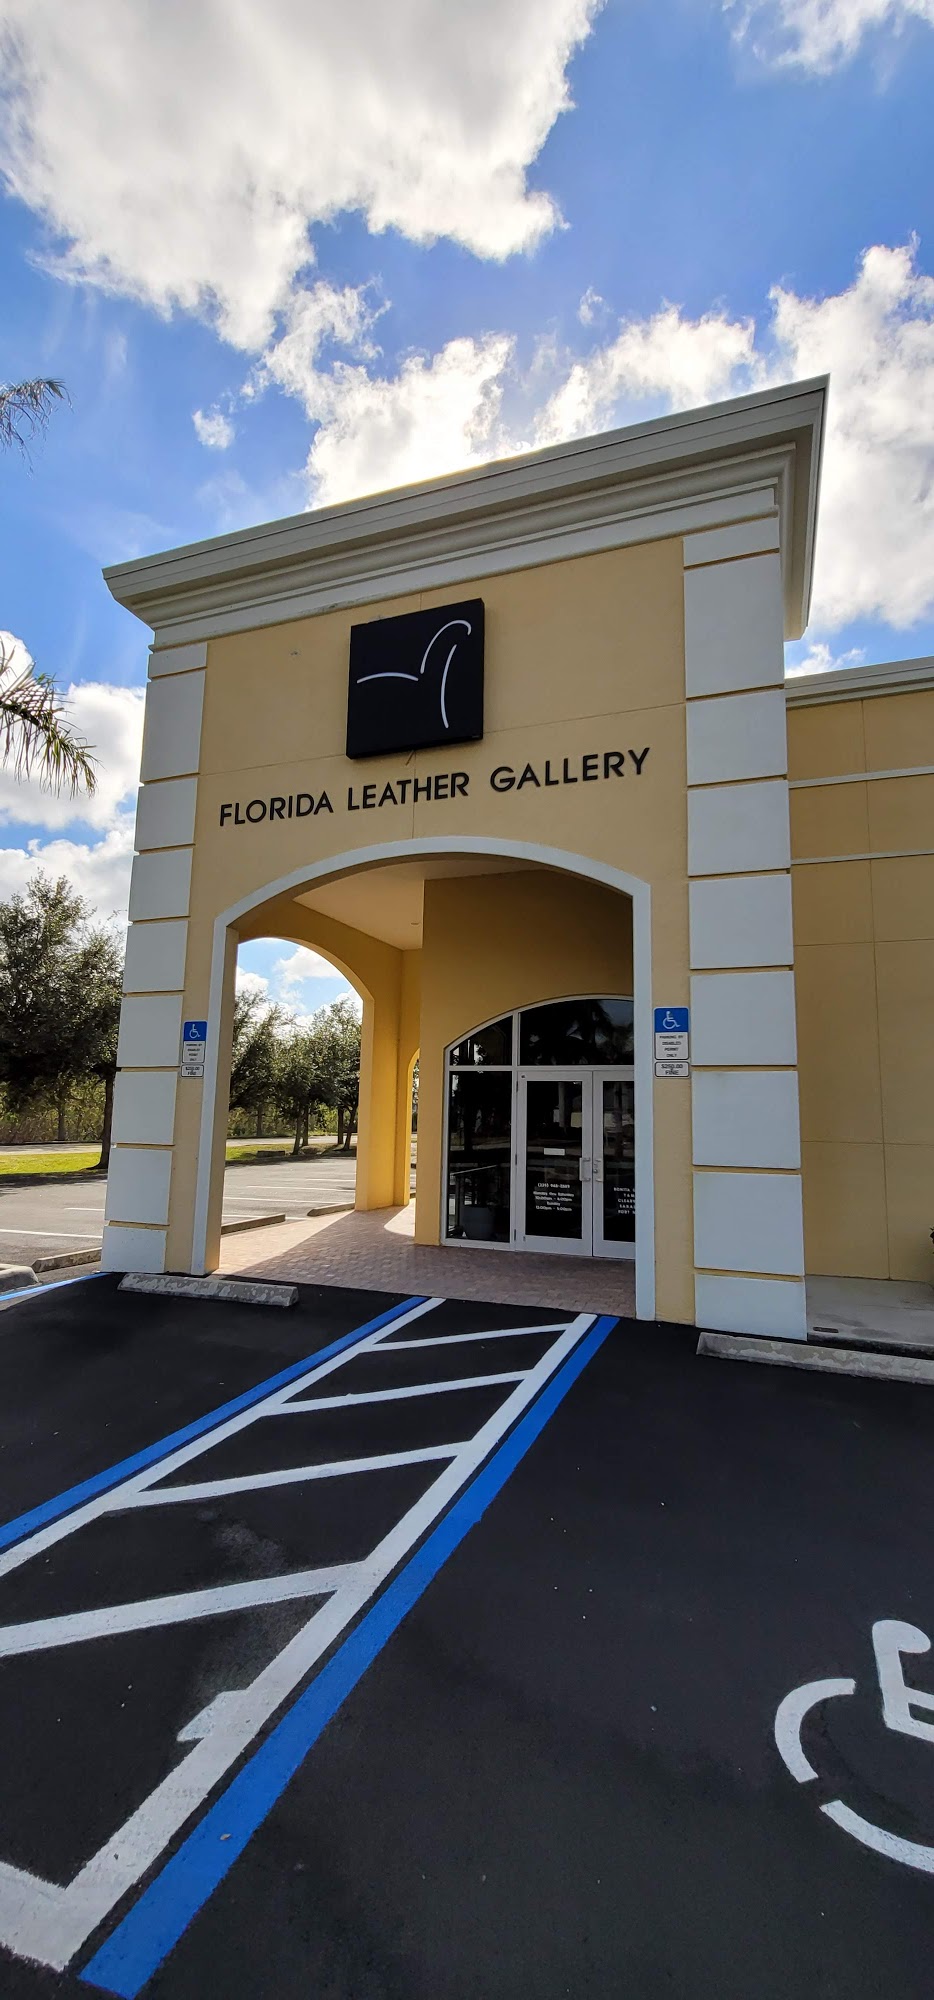 Florida Leather Gallery